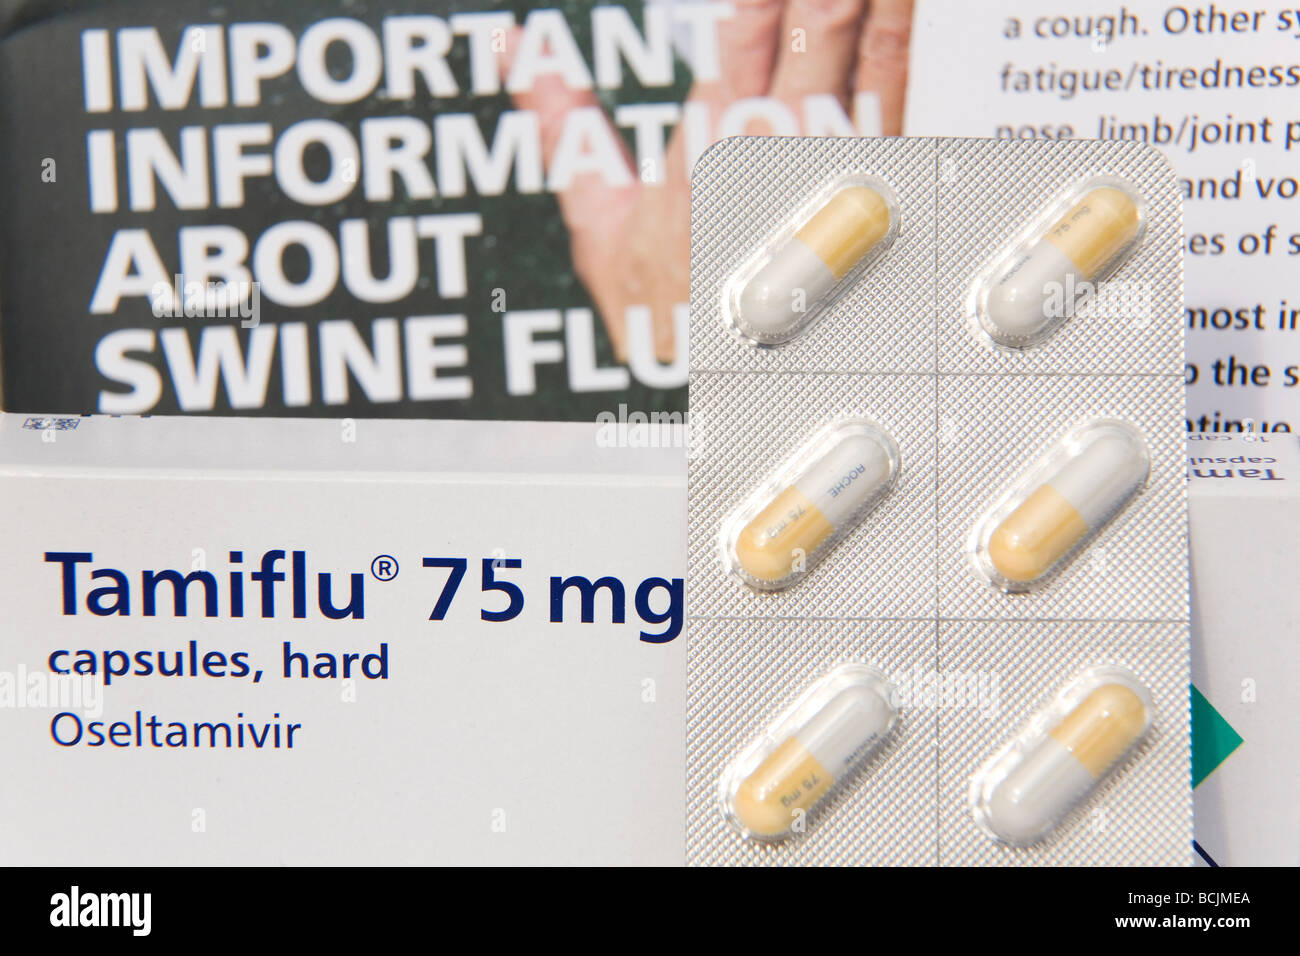 Tamiflu 75 mg tablets , one of the medicines prescribed to people with symptoms of swine flu, along with related literature. Stock Photo